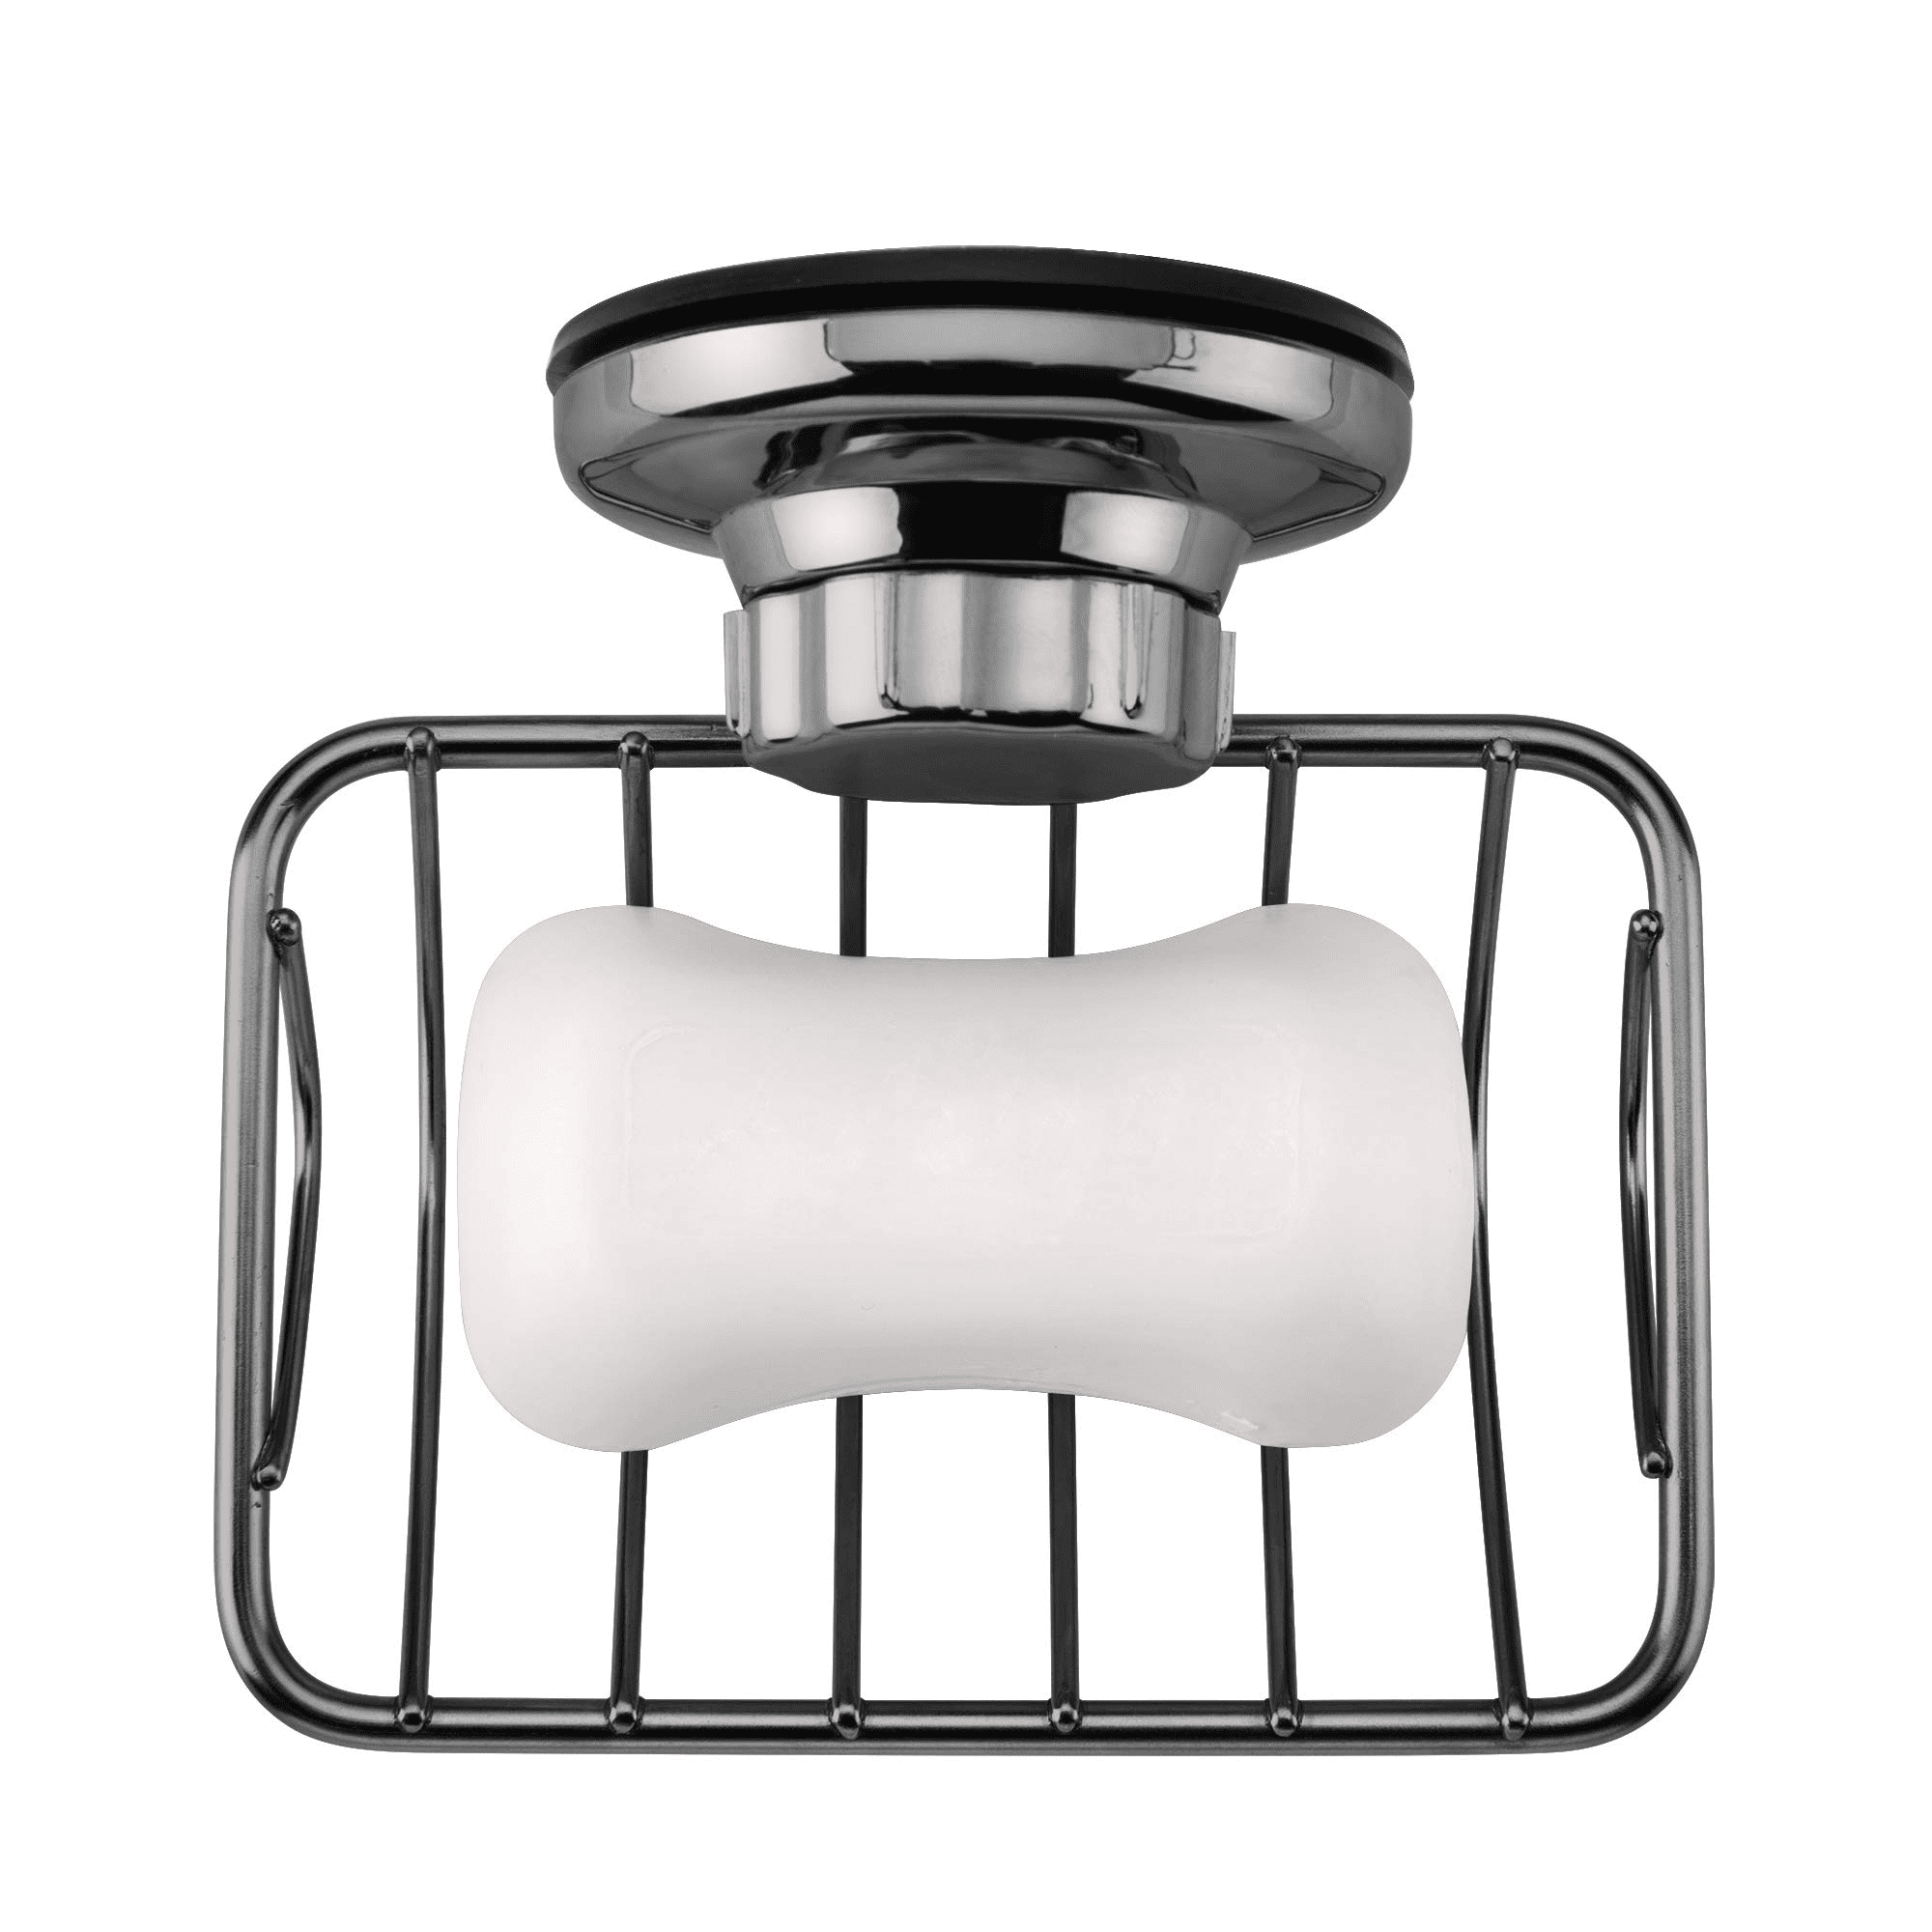 HASKO vacuum suction cup shower caddy review 